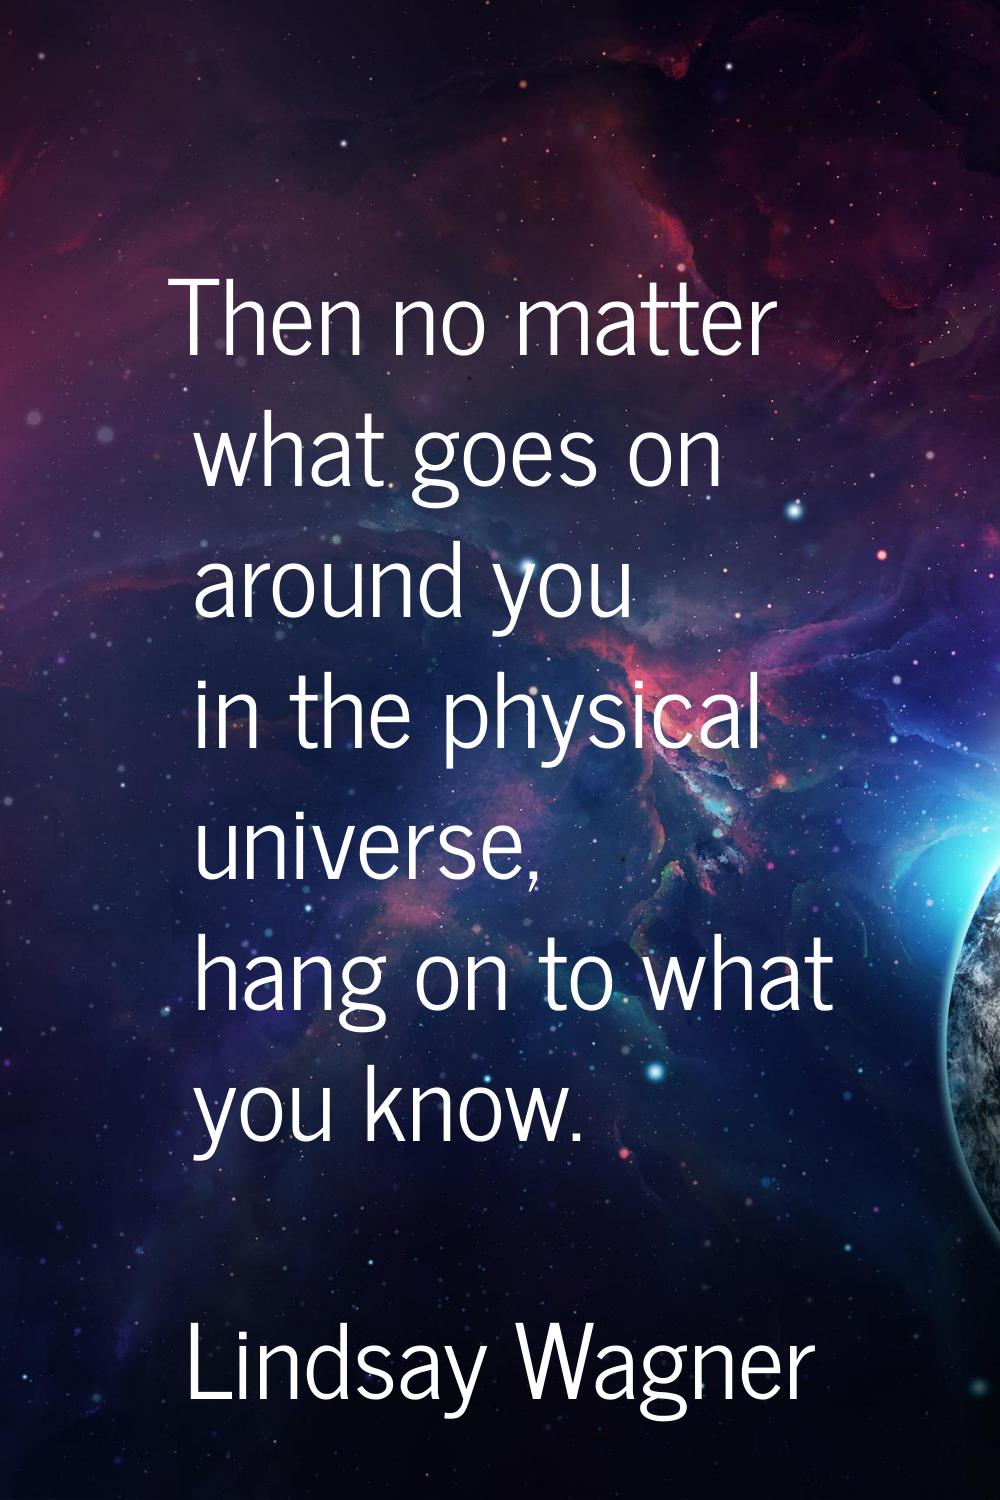 Then no matter what goes on around you in the physical universe, hang on to what you know.